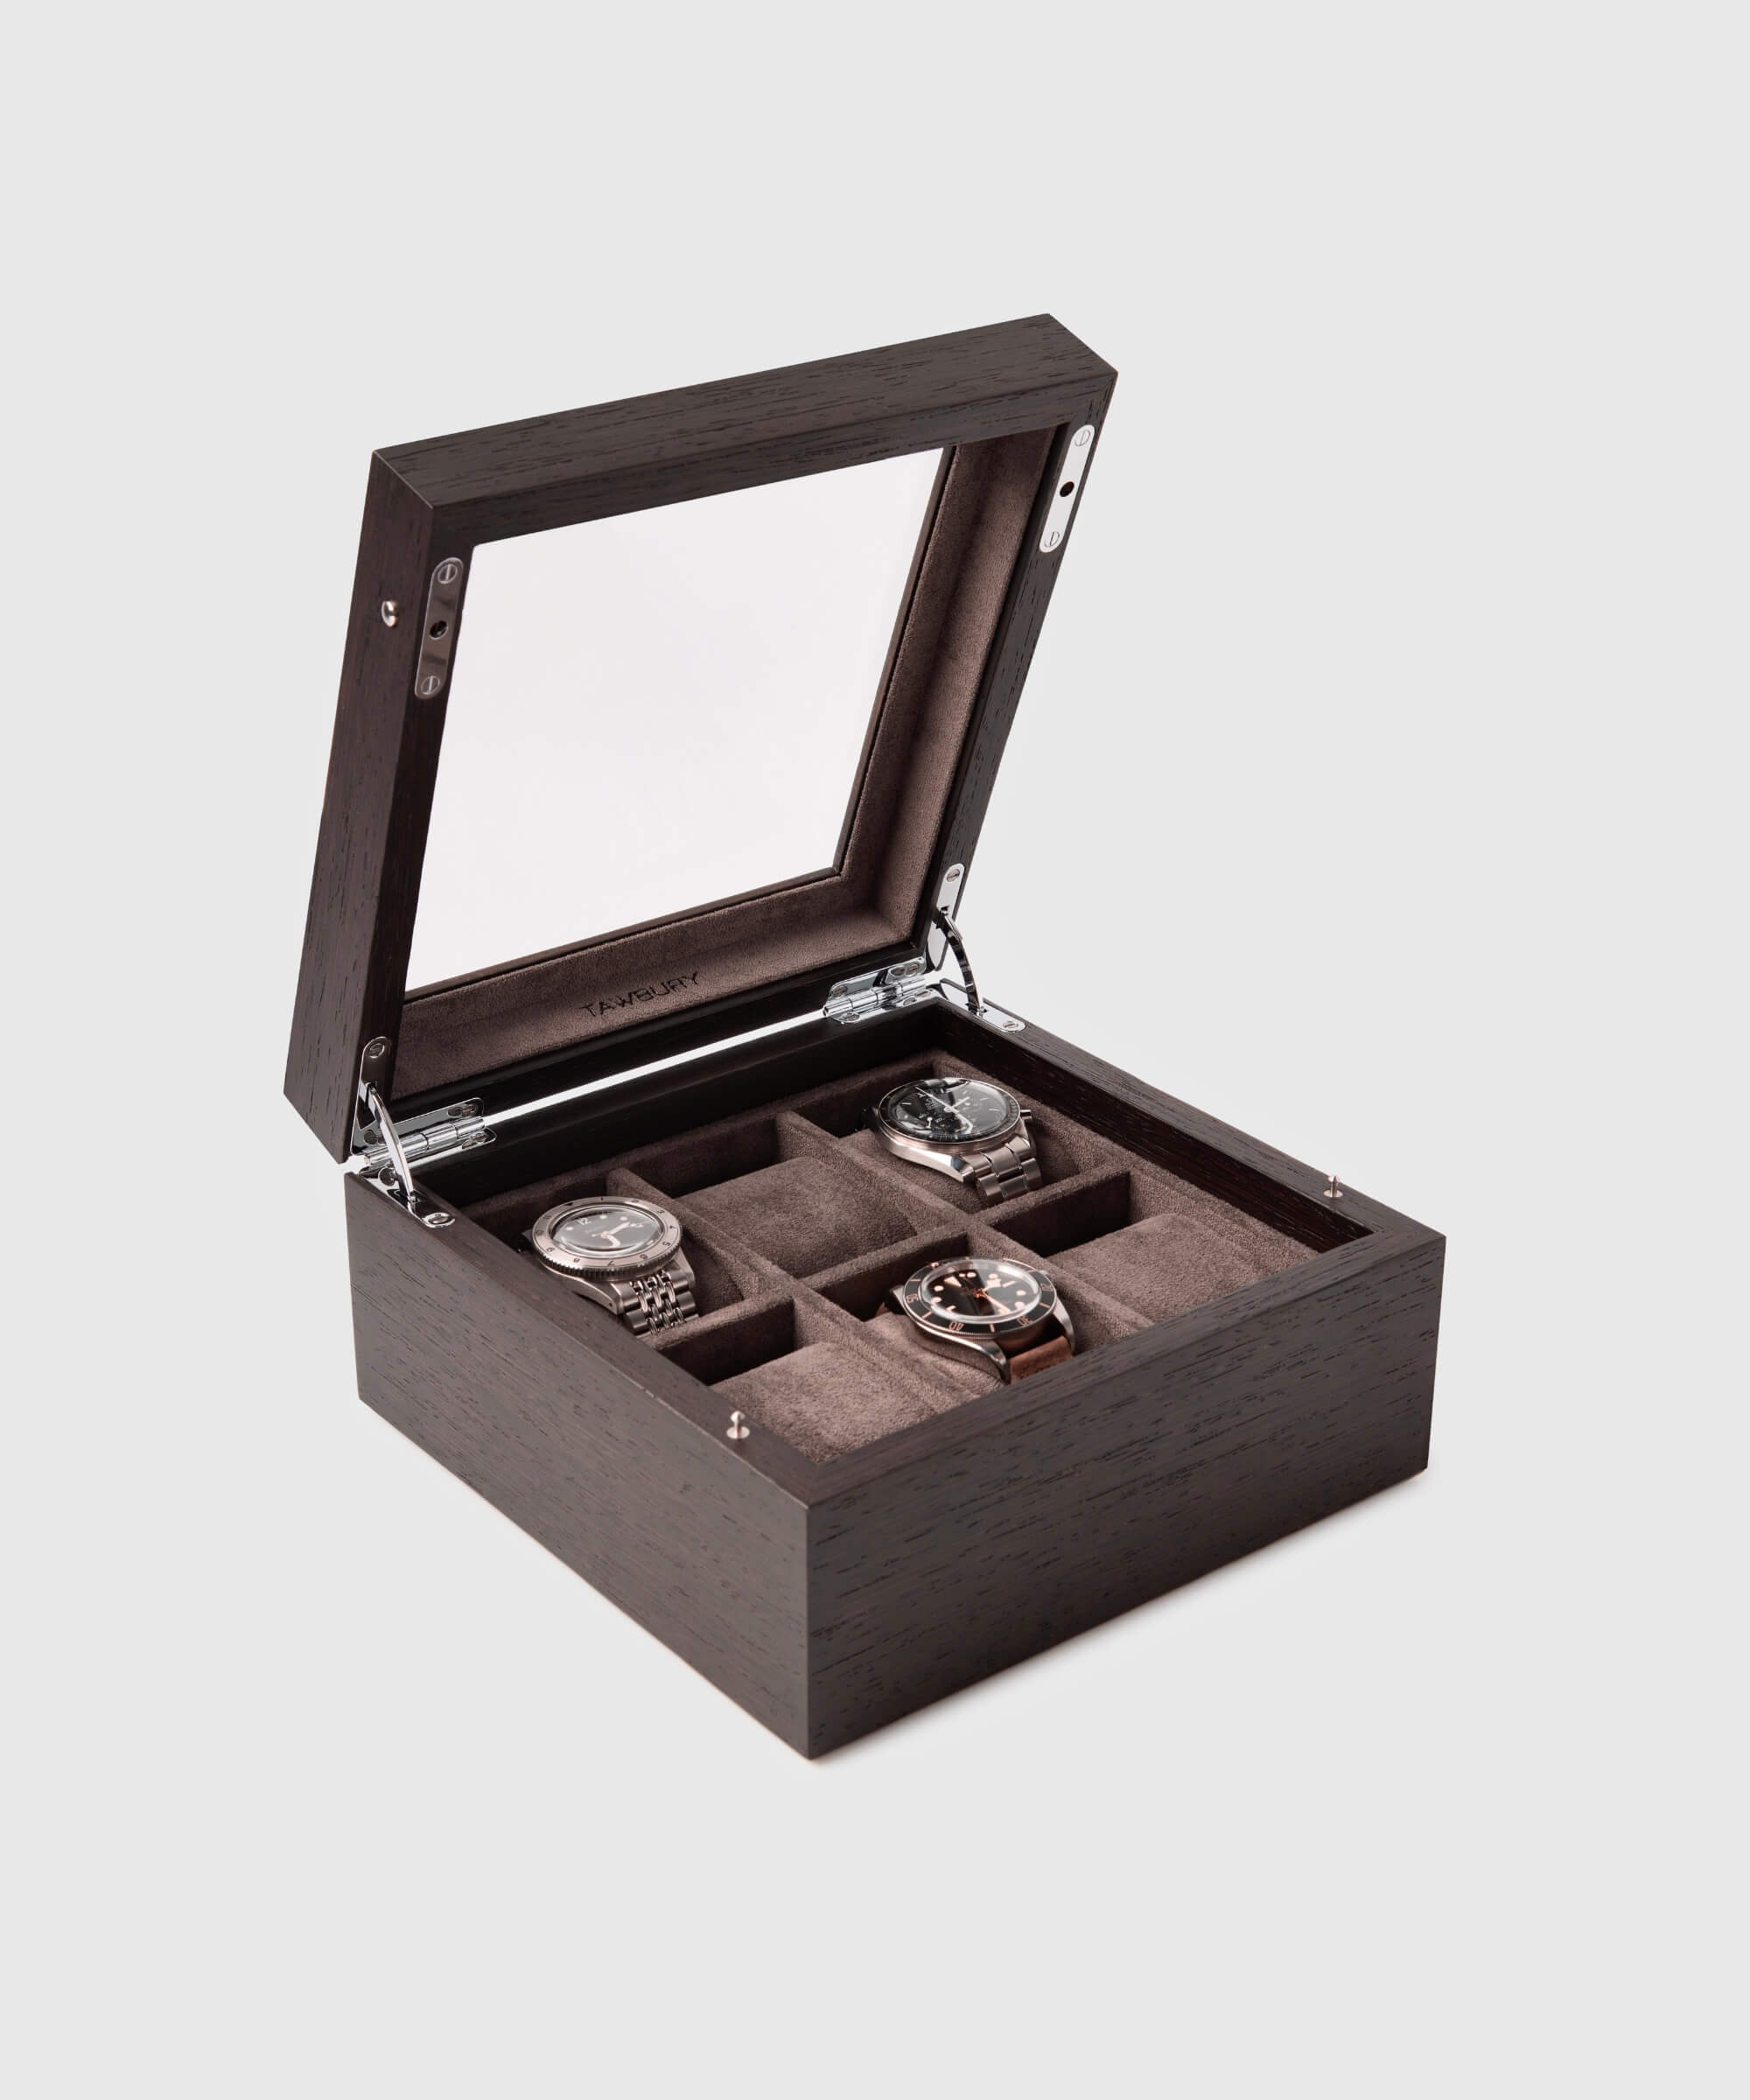 A TAWBURY Grove 6 Slot Watch Box with Glass Lid - Kassod displaying four timepieces.